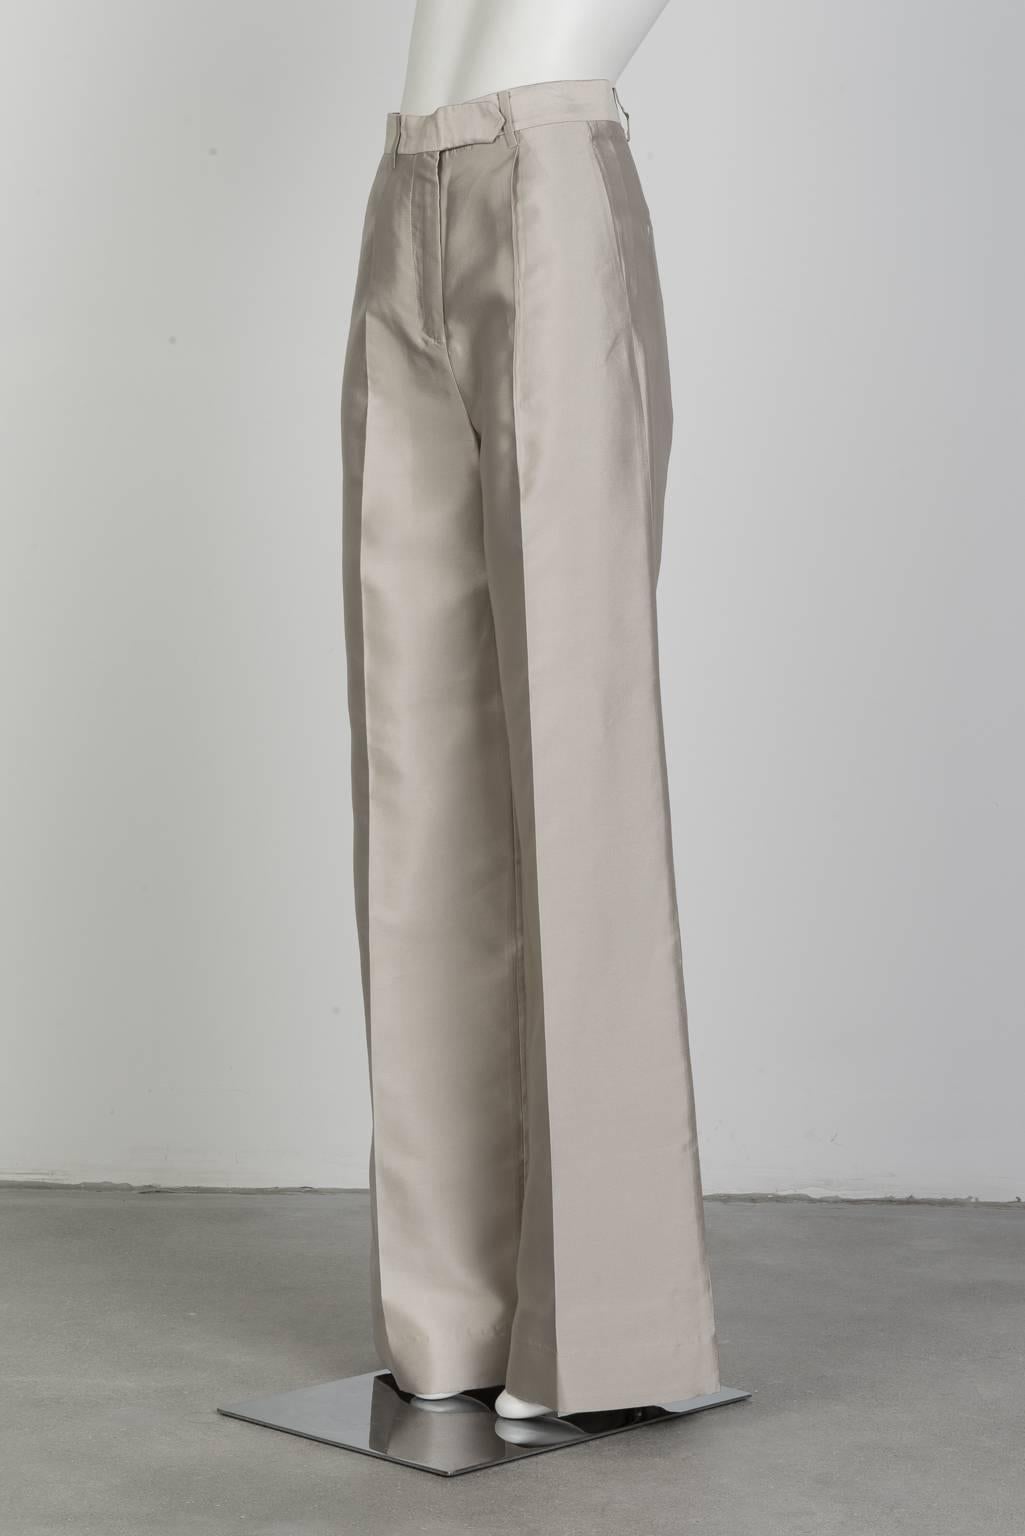 Classic high waist, wide leg trouser with back pockets in champagne colored structured silk.